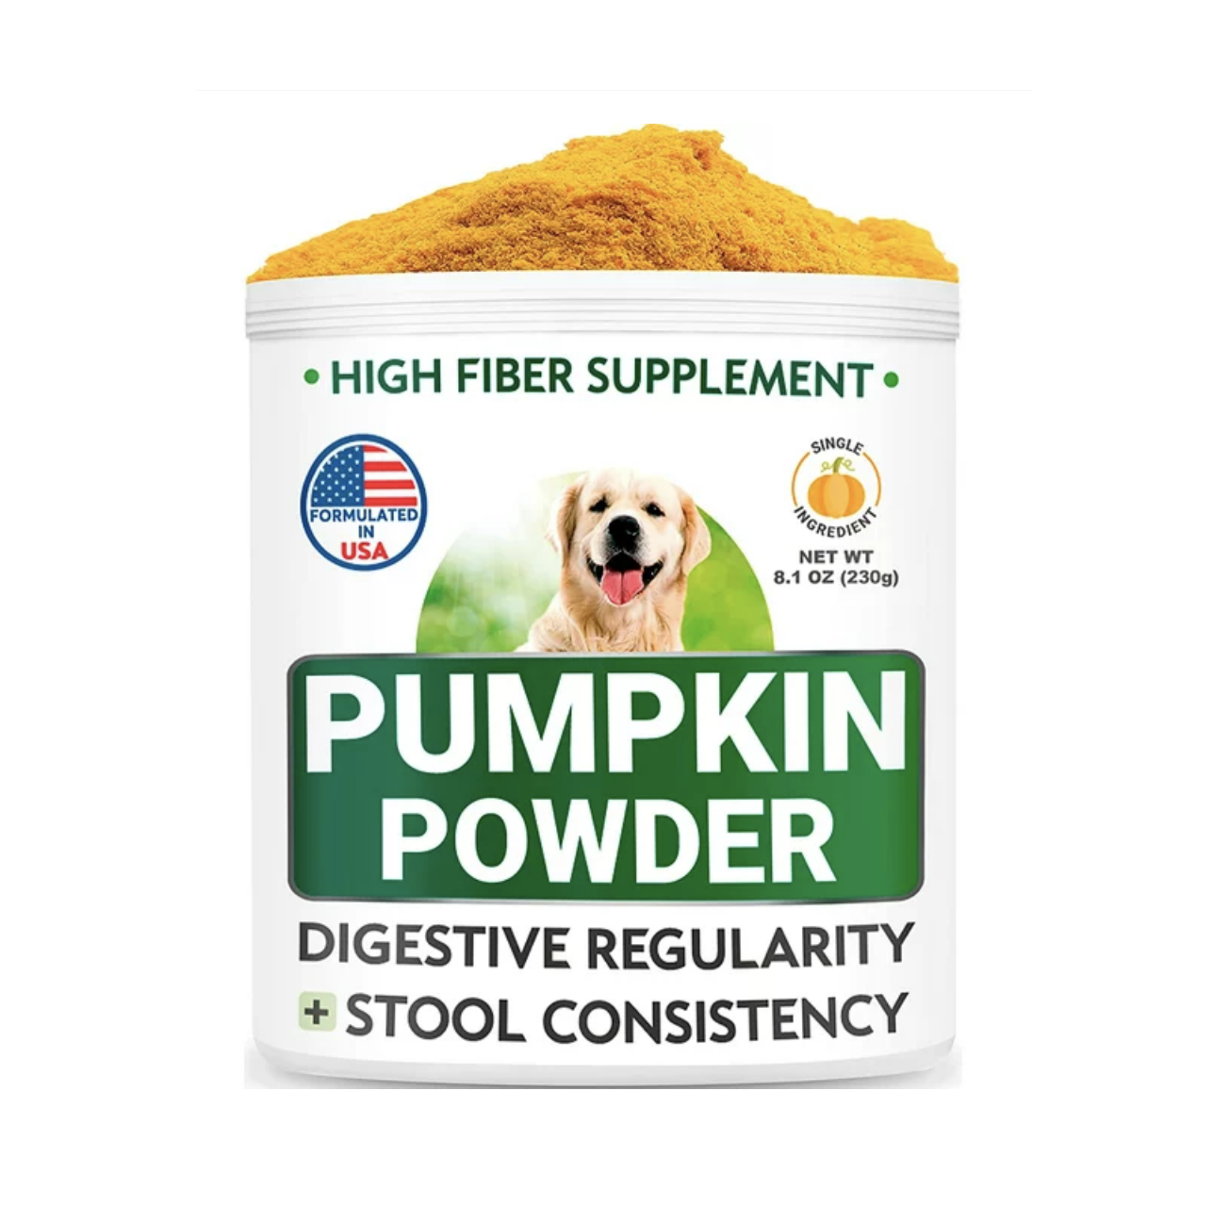 do they make powder pumpkin for dogs